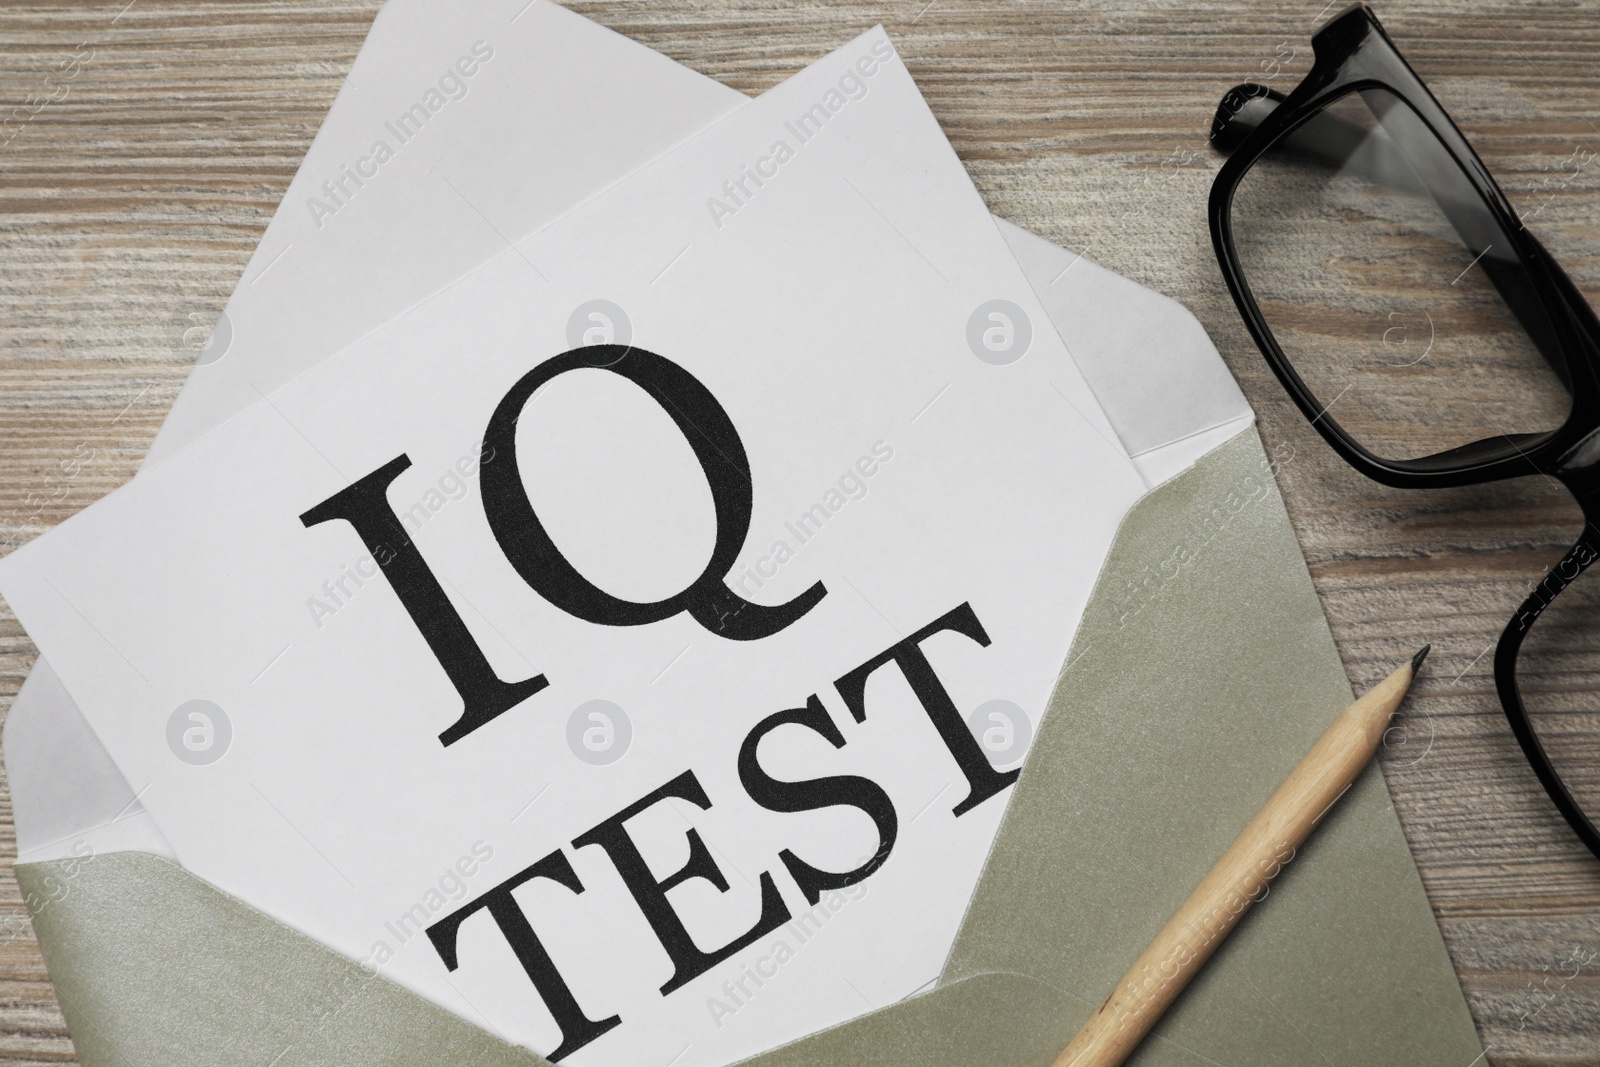 Photo of Paper with words IQ Test in envelope, pencil and glasses on wooden table, flat lay